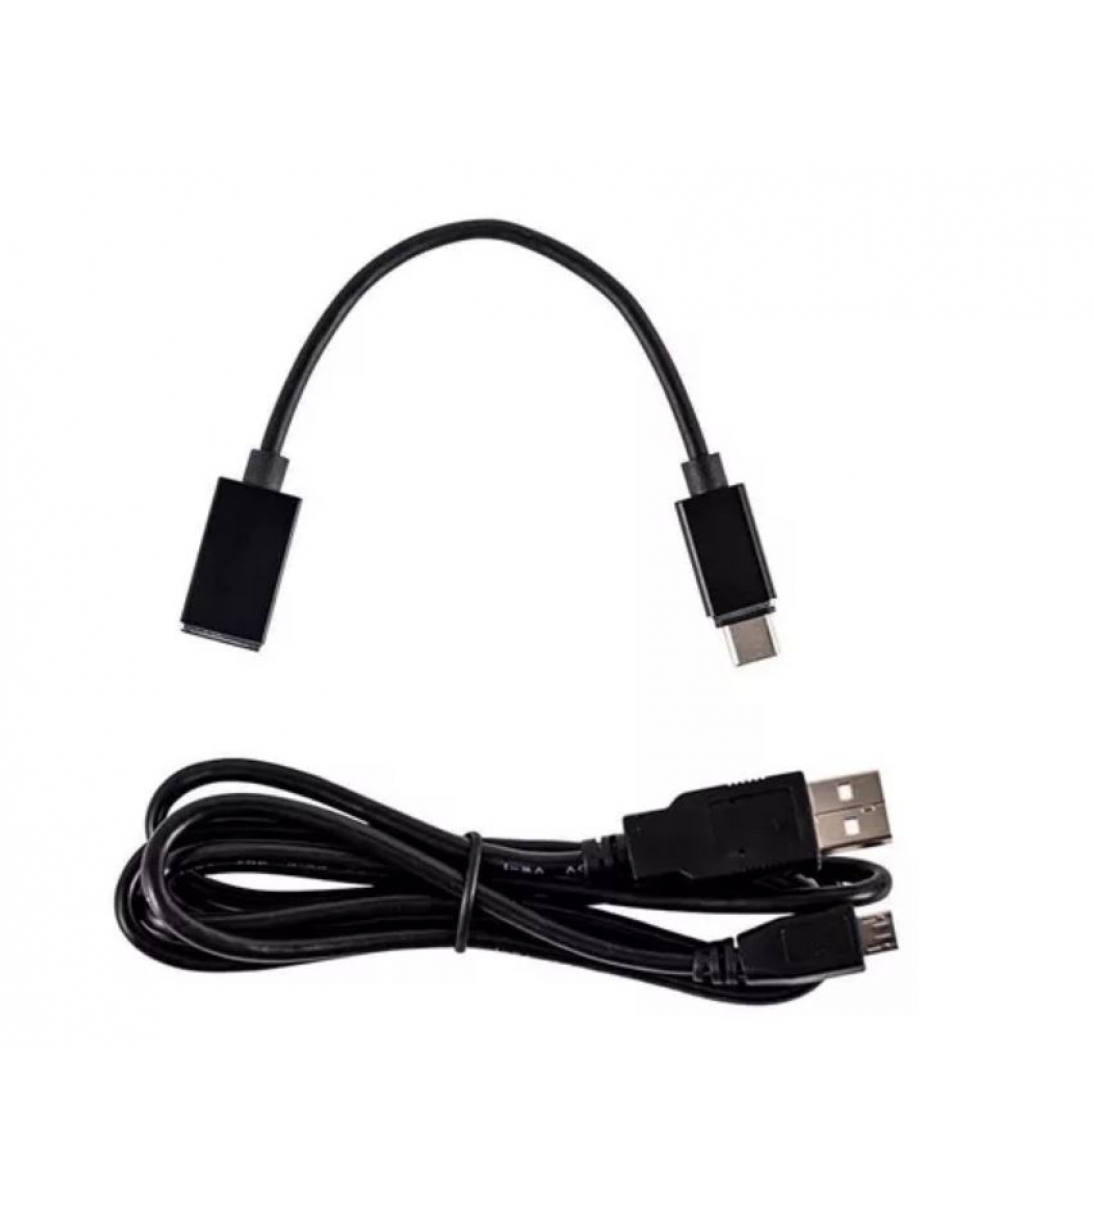 OTG Cable for iOS USB 1.5m